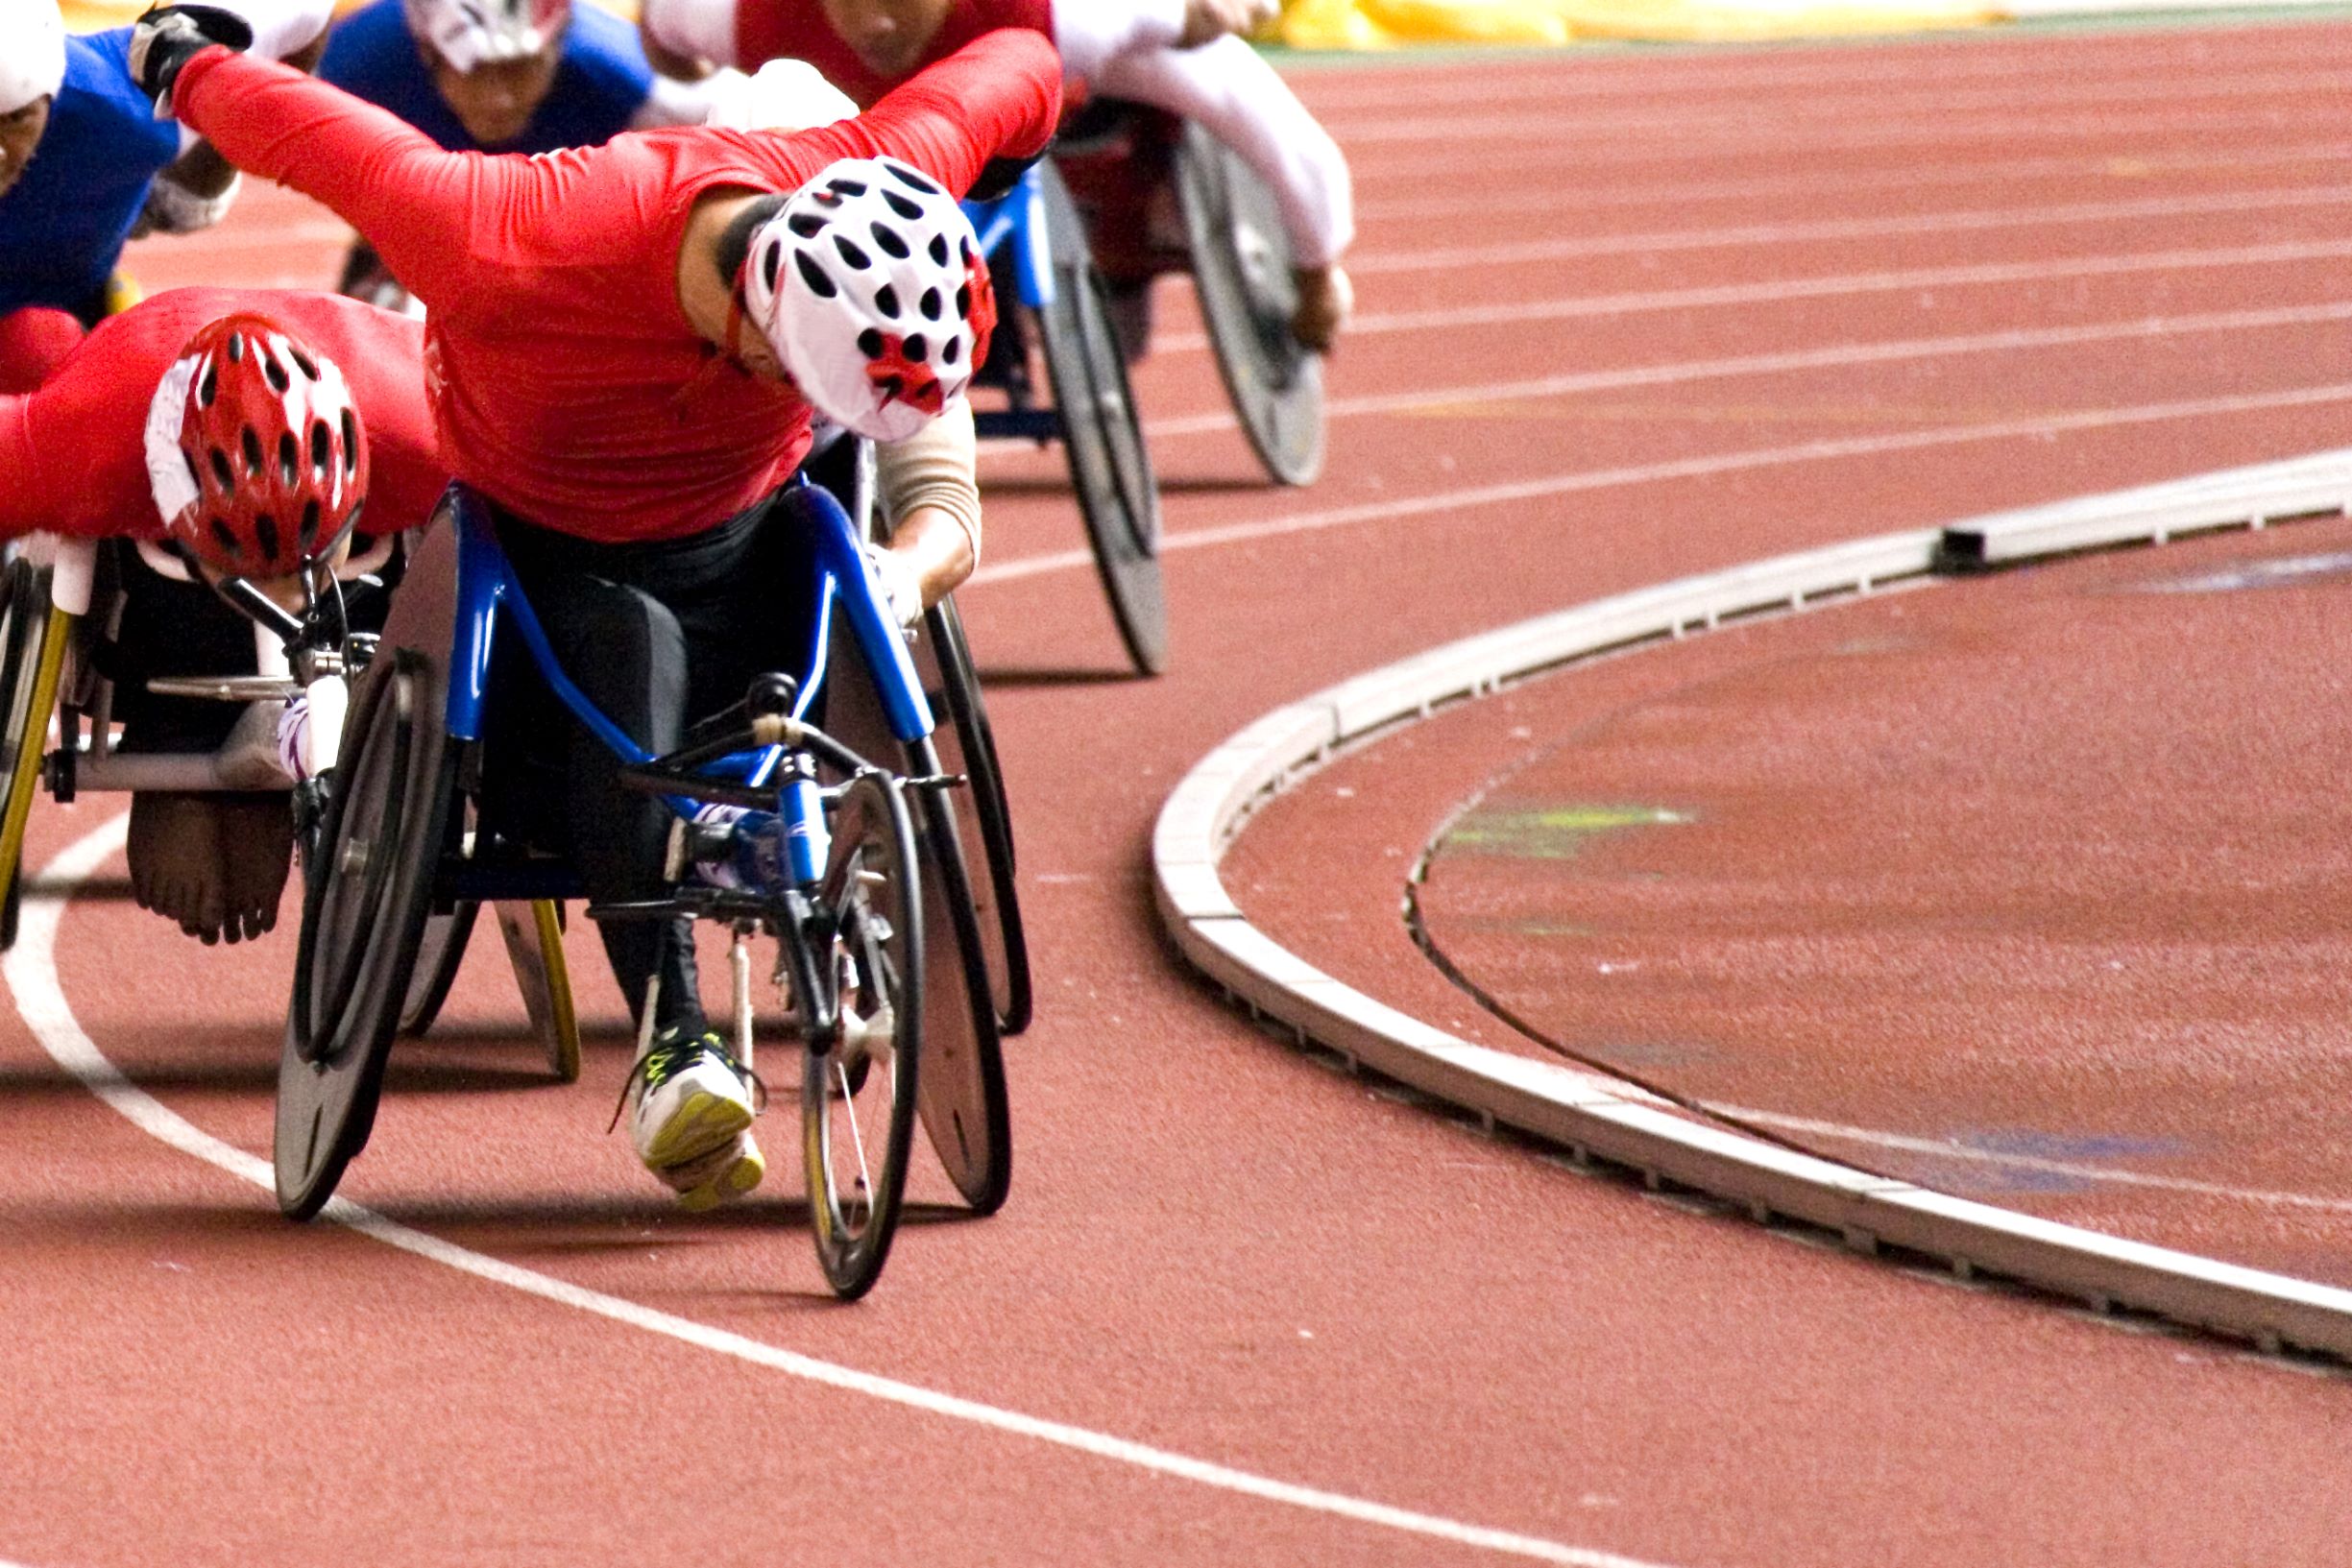 Para-athletics race. Closeup view of leading athlete during a race on the track.